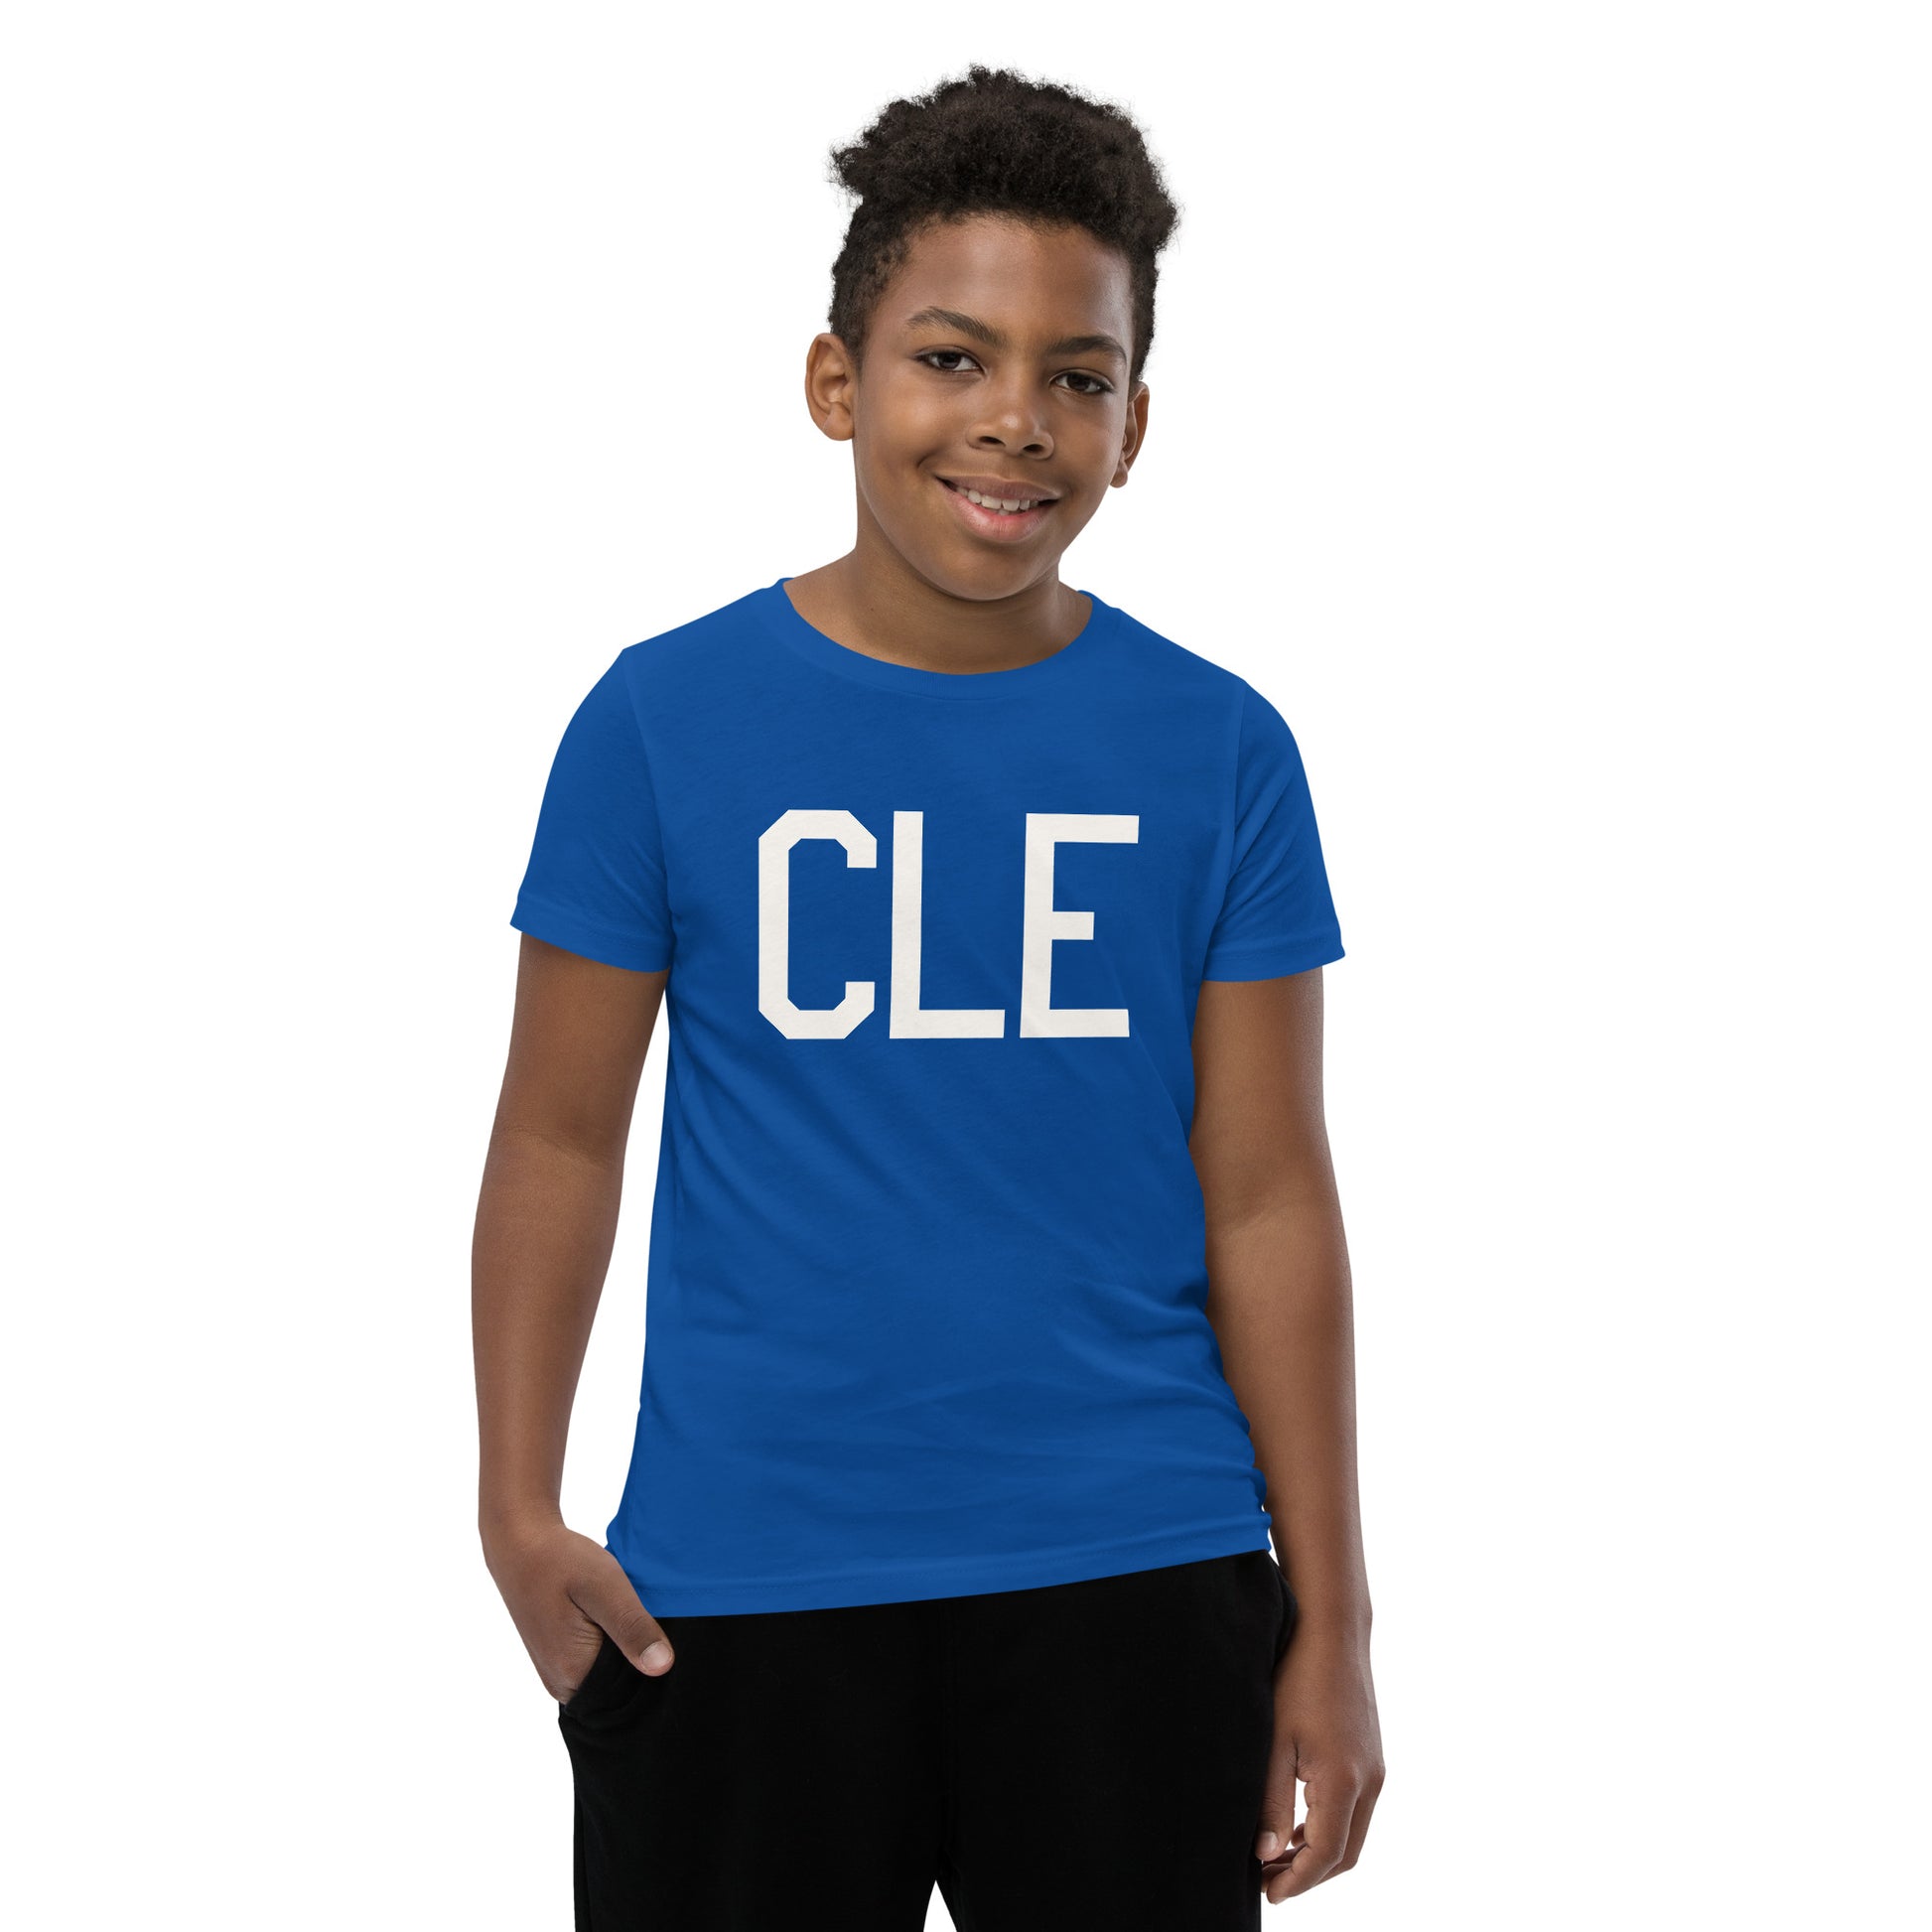 Kid's T-Shirt - White Graphic • CLE Cleveland • YHM Designs - Image 11